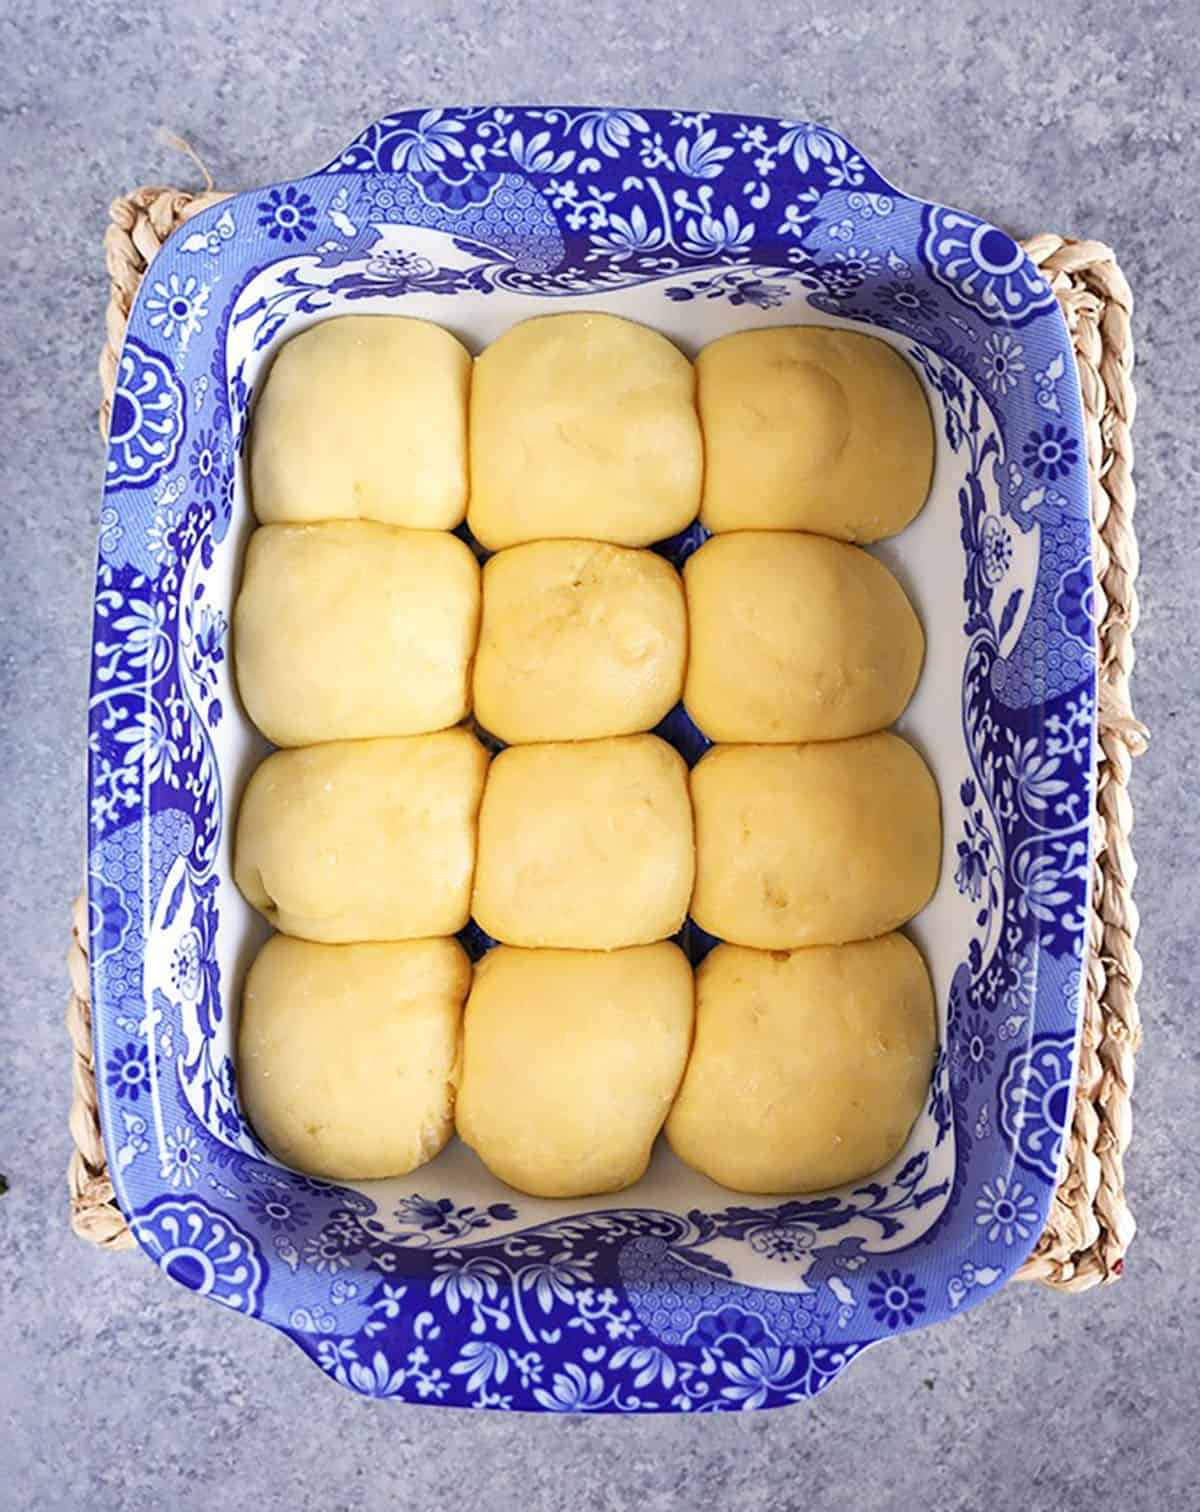 Dinner rolls in a baking dish before baking.